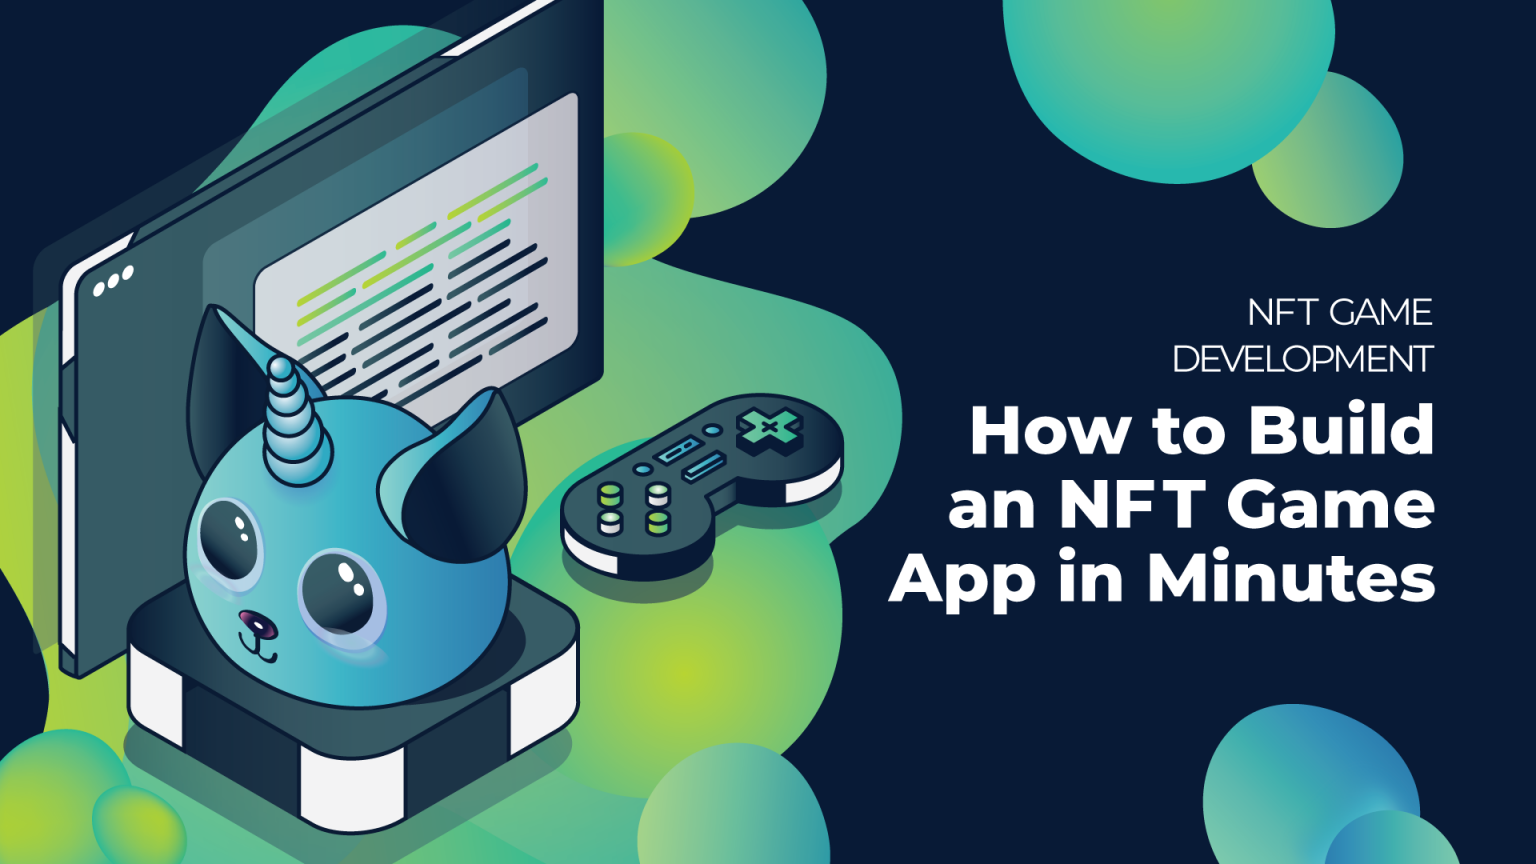 NFT Game Development — How to Build an NFT Game App in Minutes